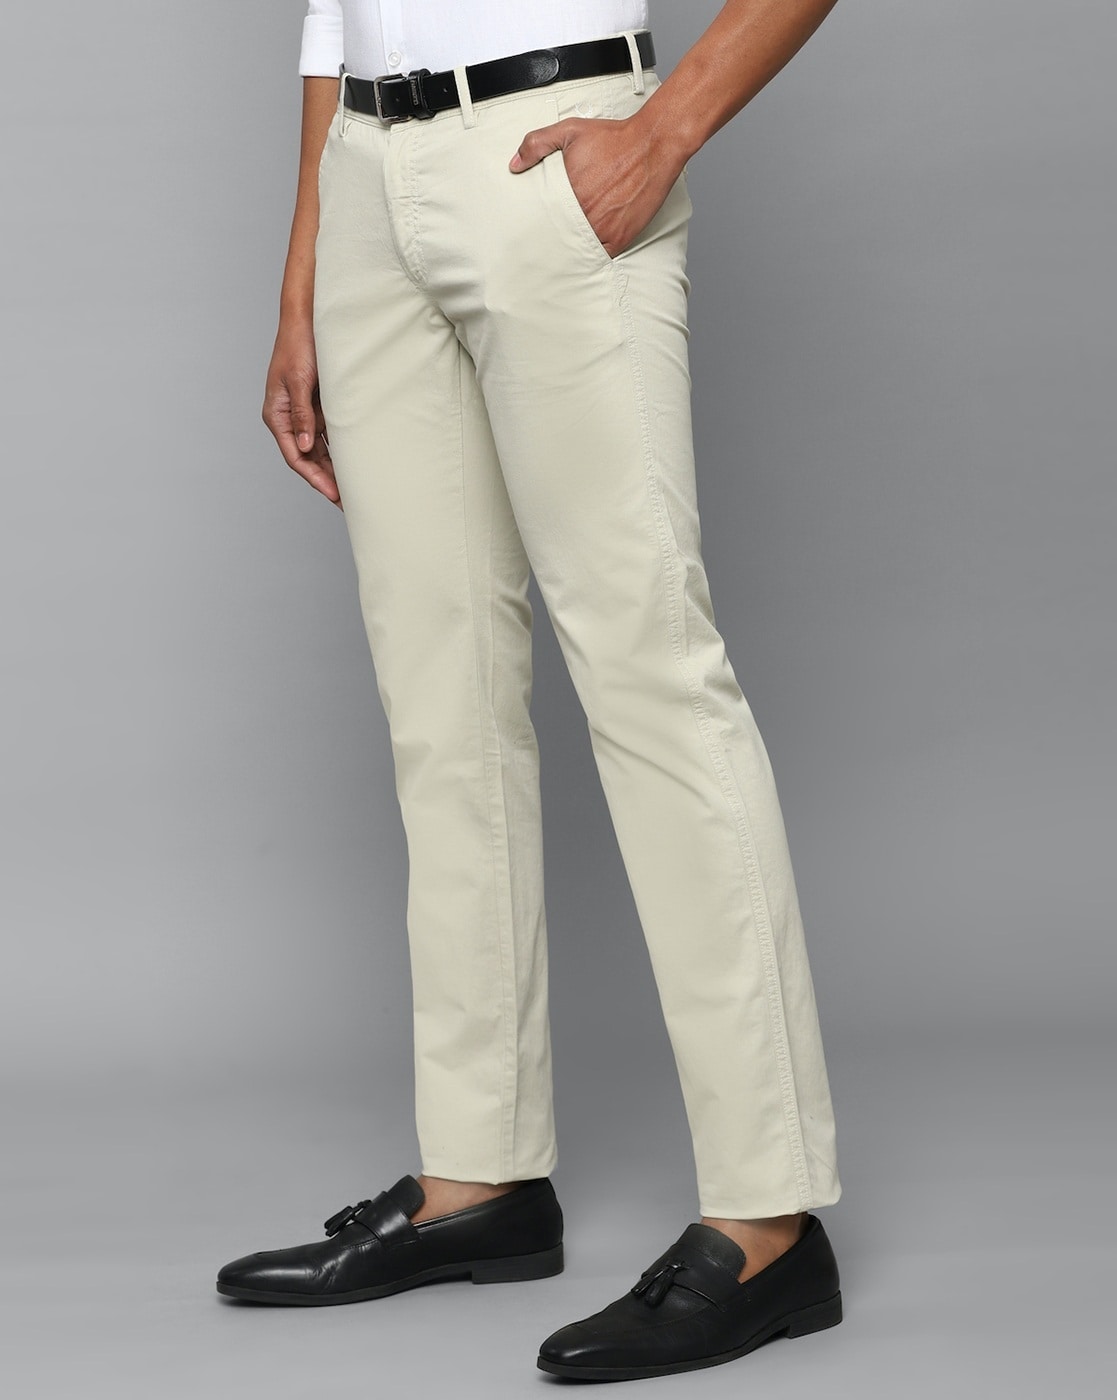 Buy ALLEN SOLLY Khaki Mens Slim Fit Solid Formal Trousers | Shoppers Stop